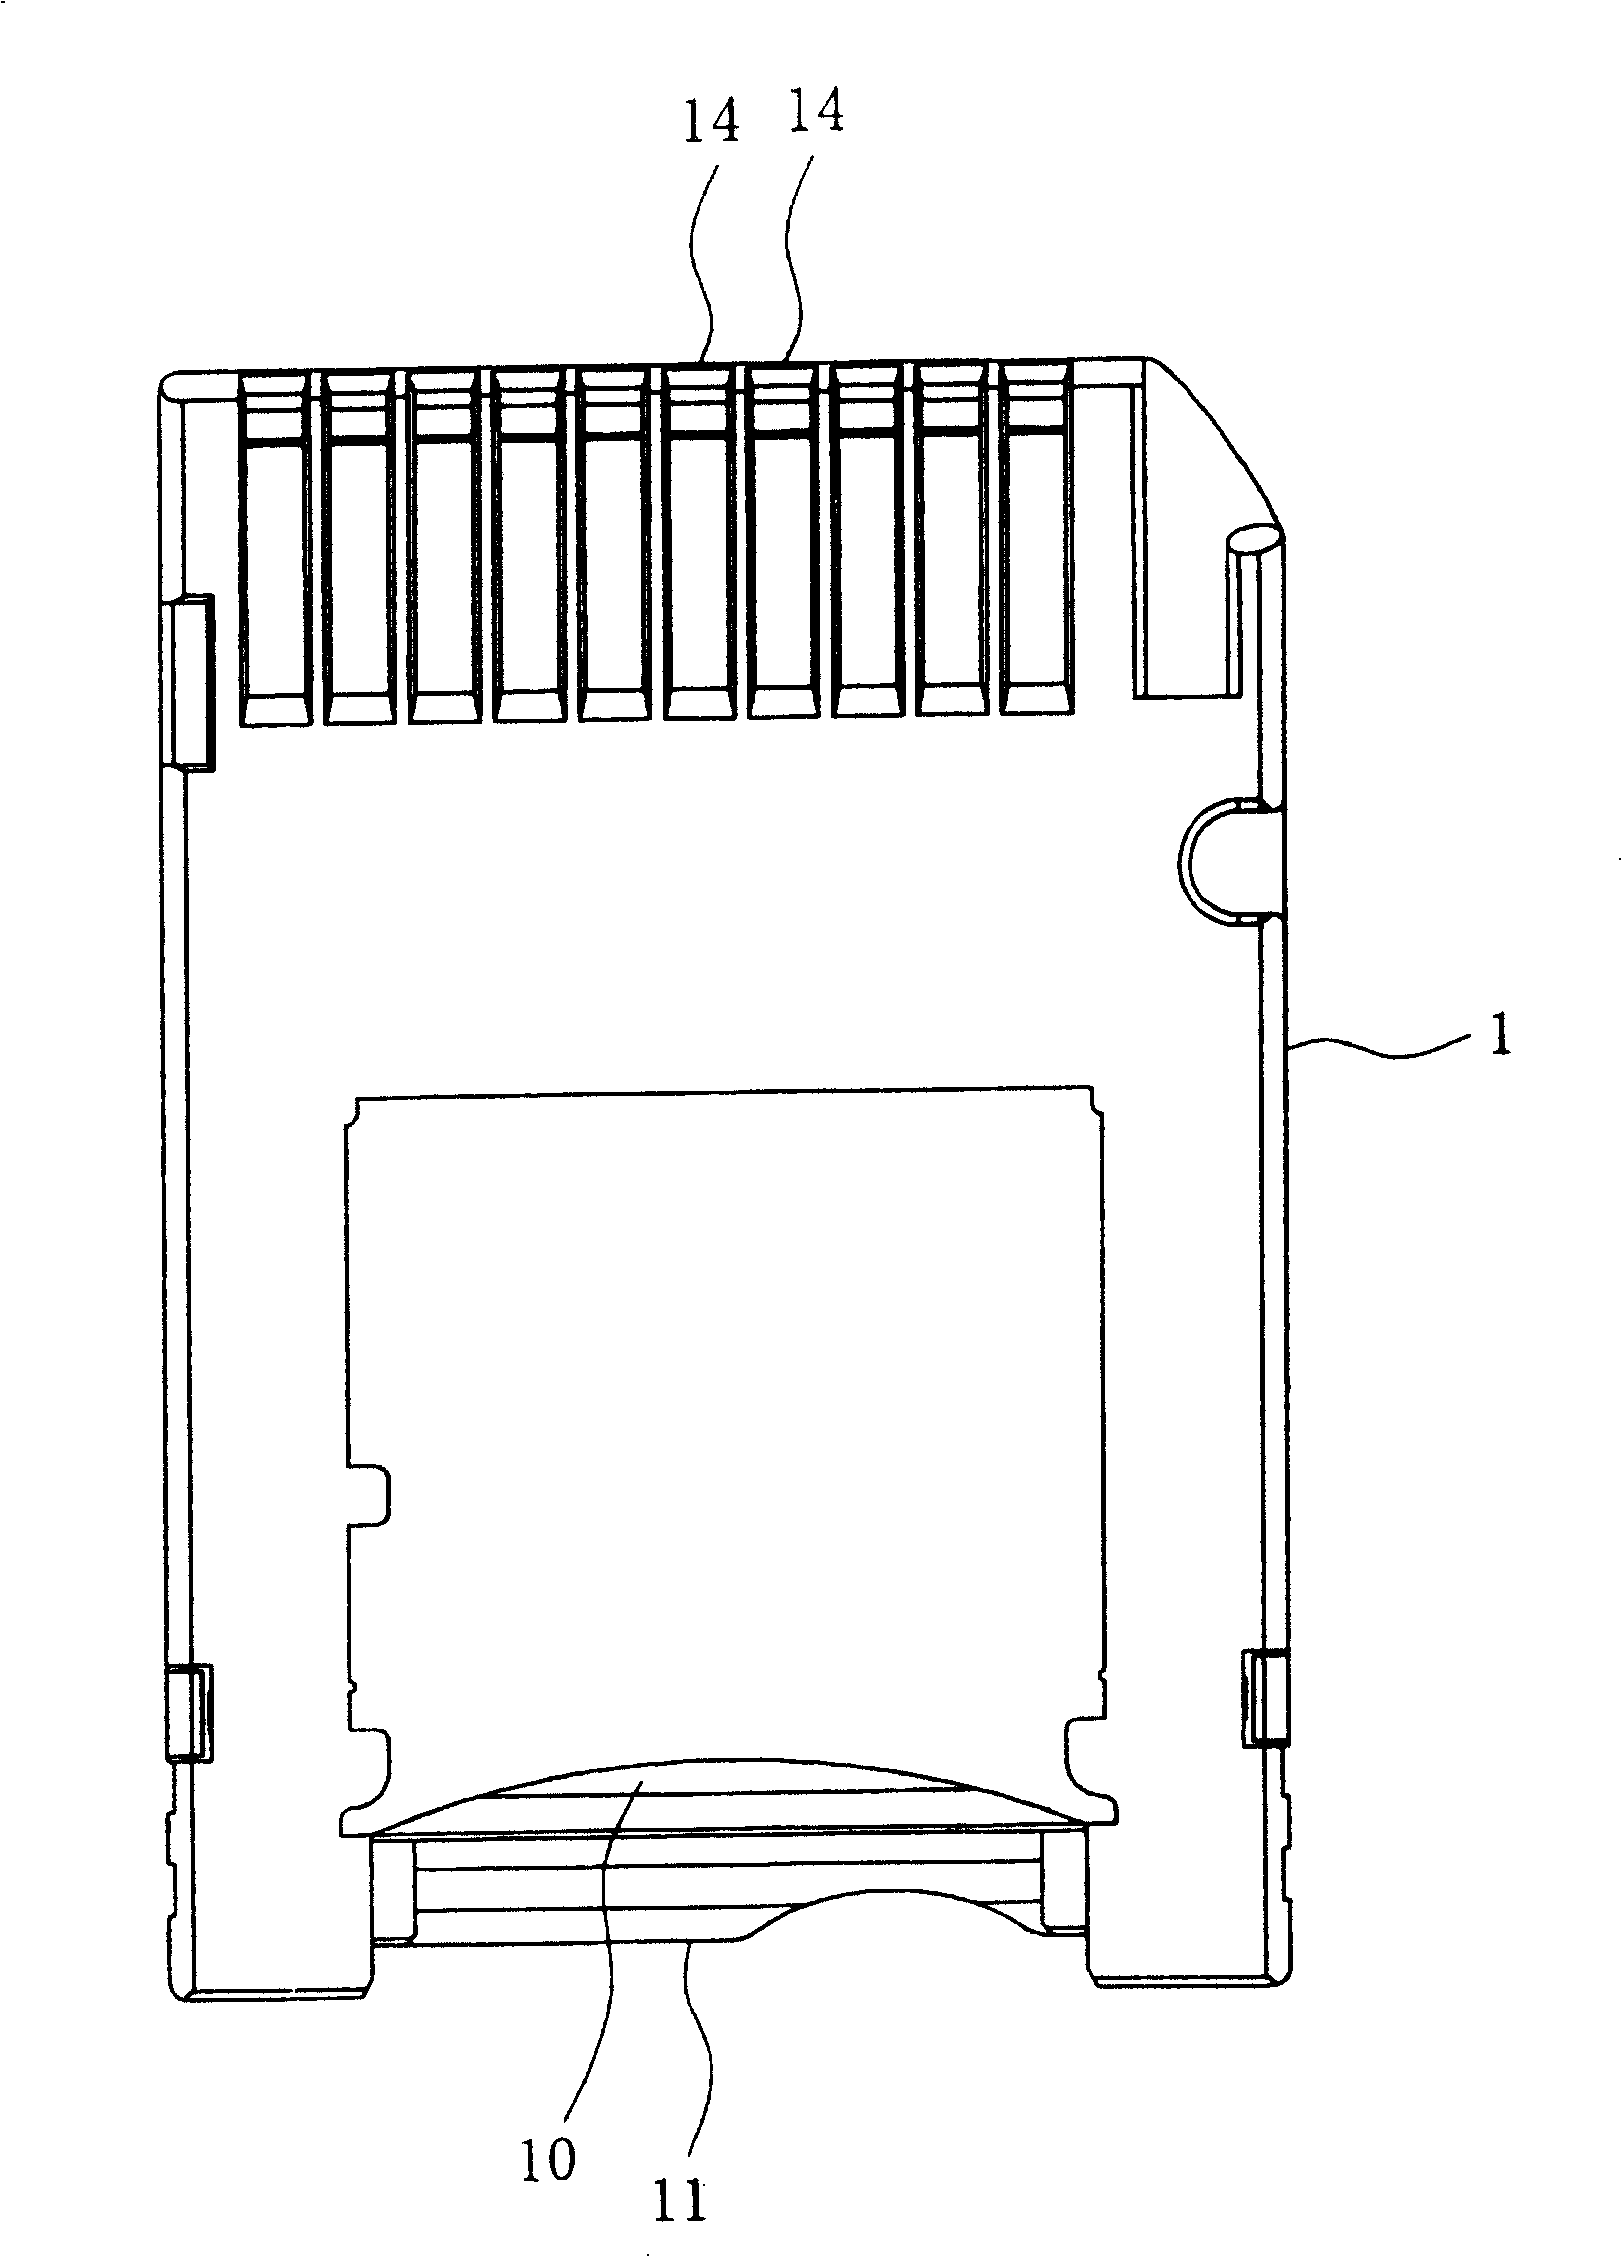 Card mounting device